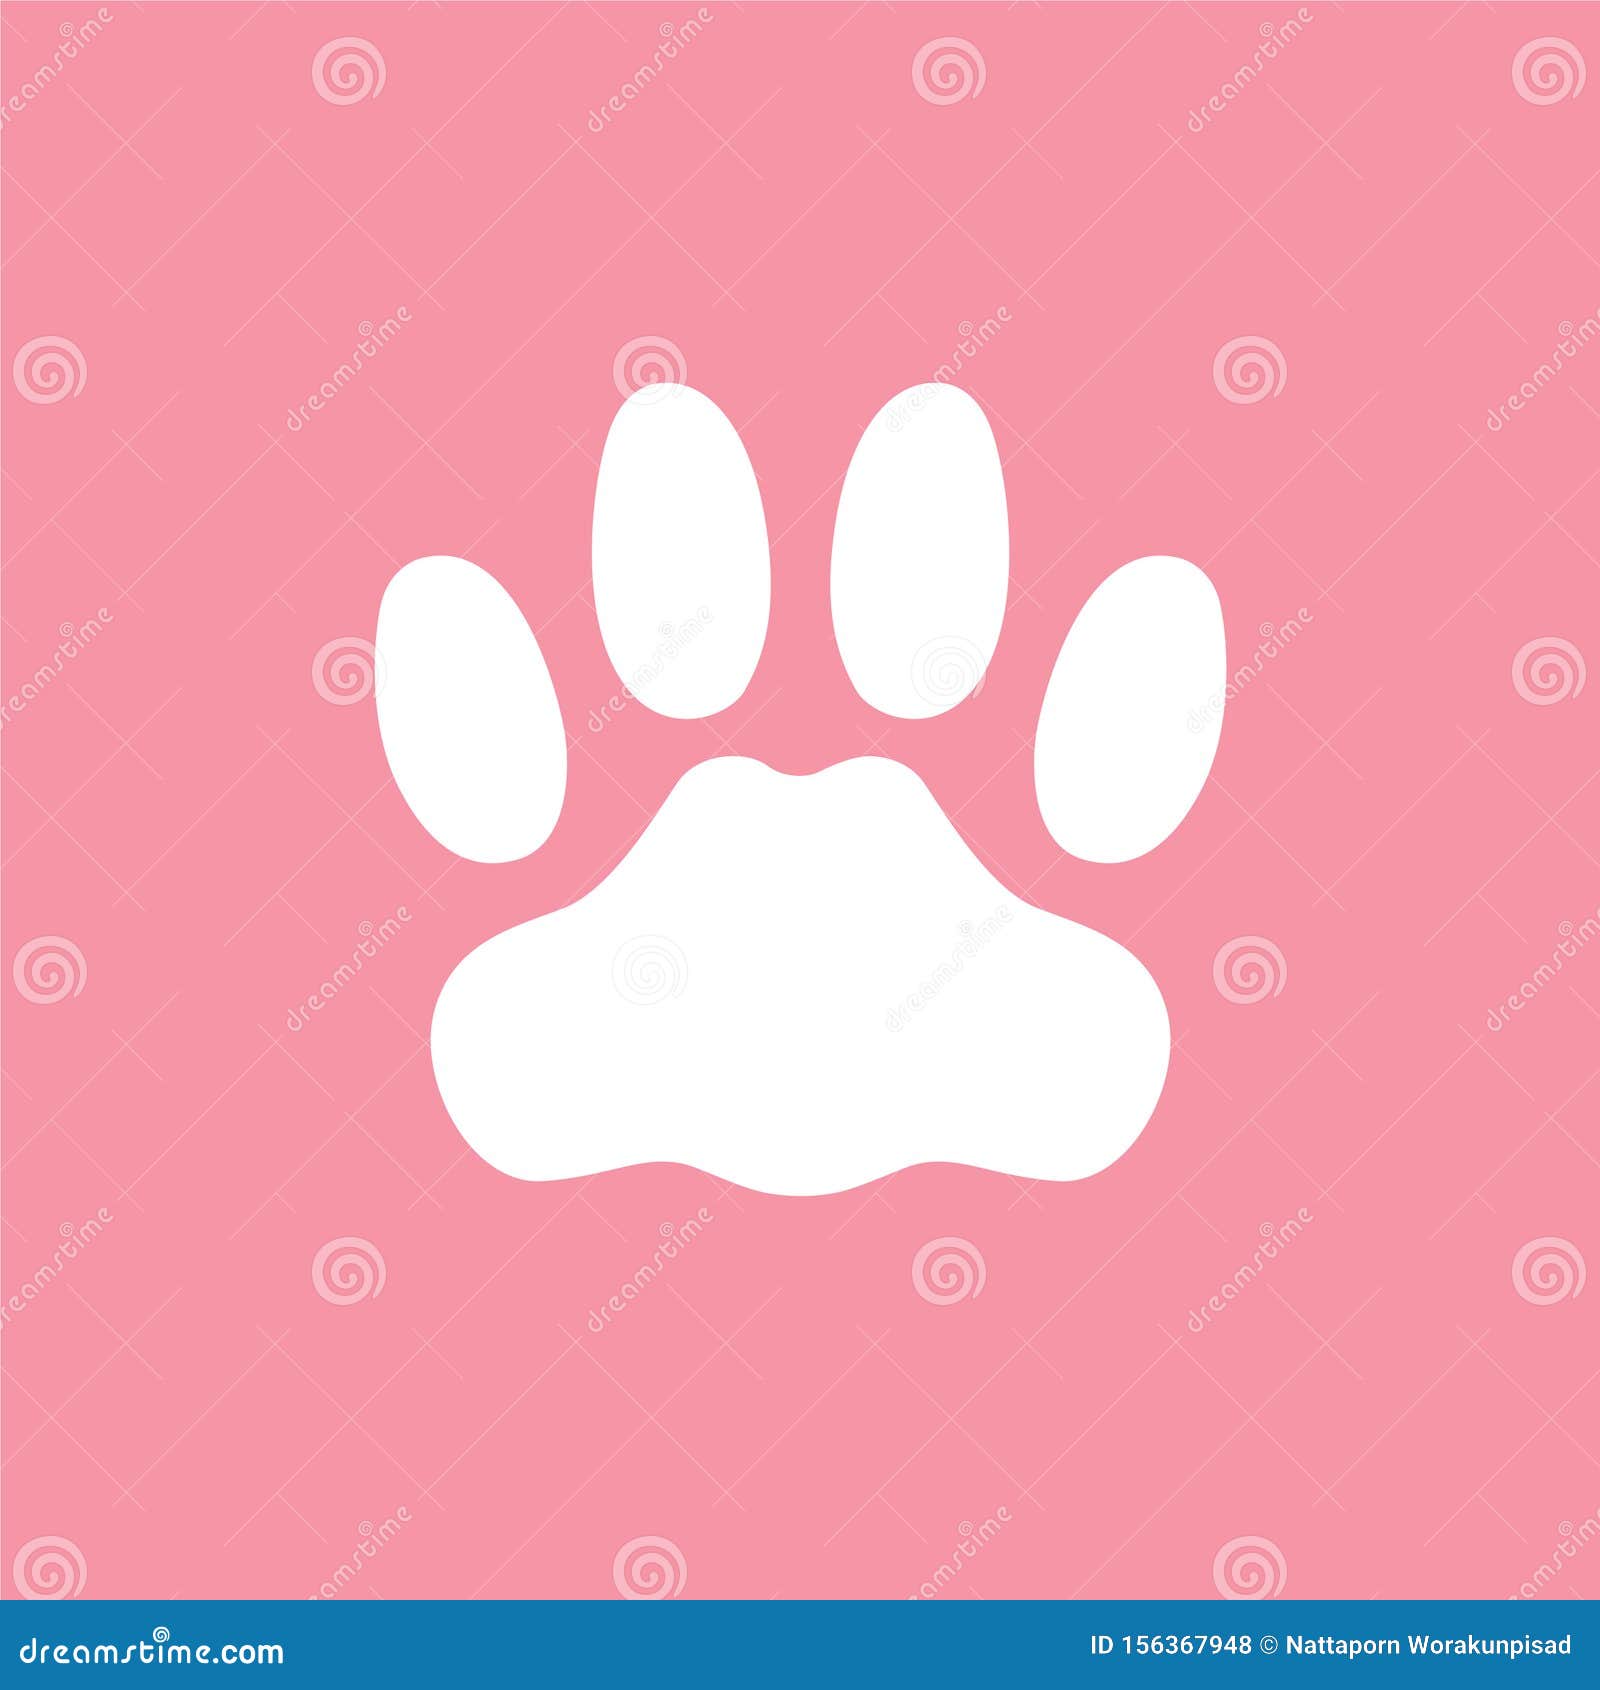 Cat Paw Print Isolated on Pink Background. Stock Vector - Illustration